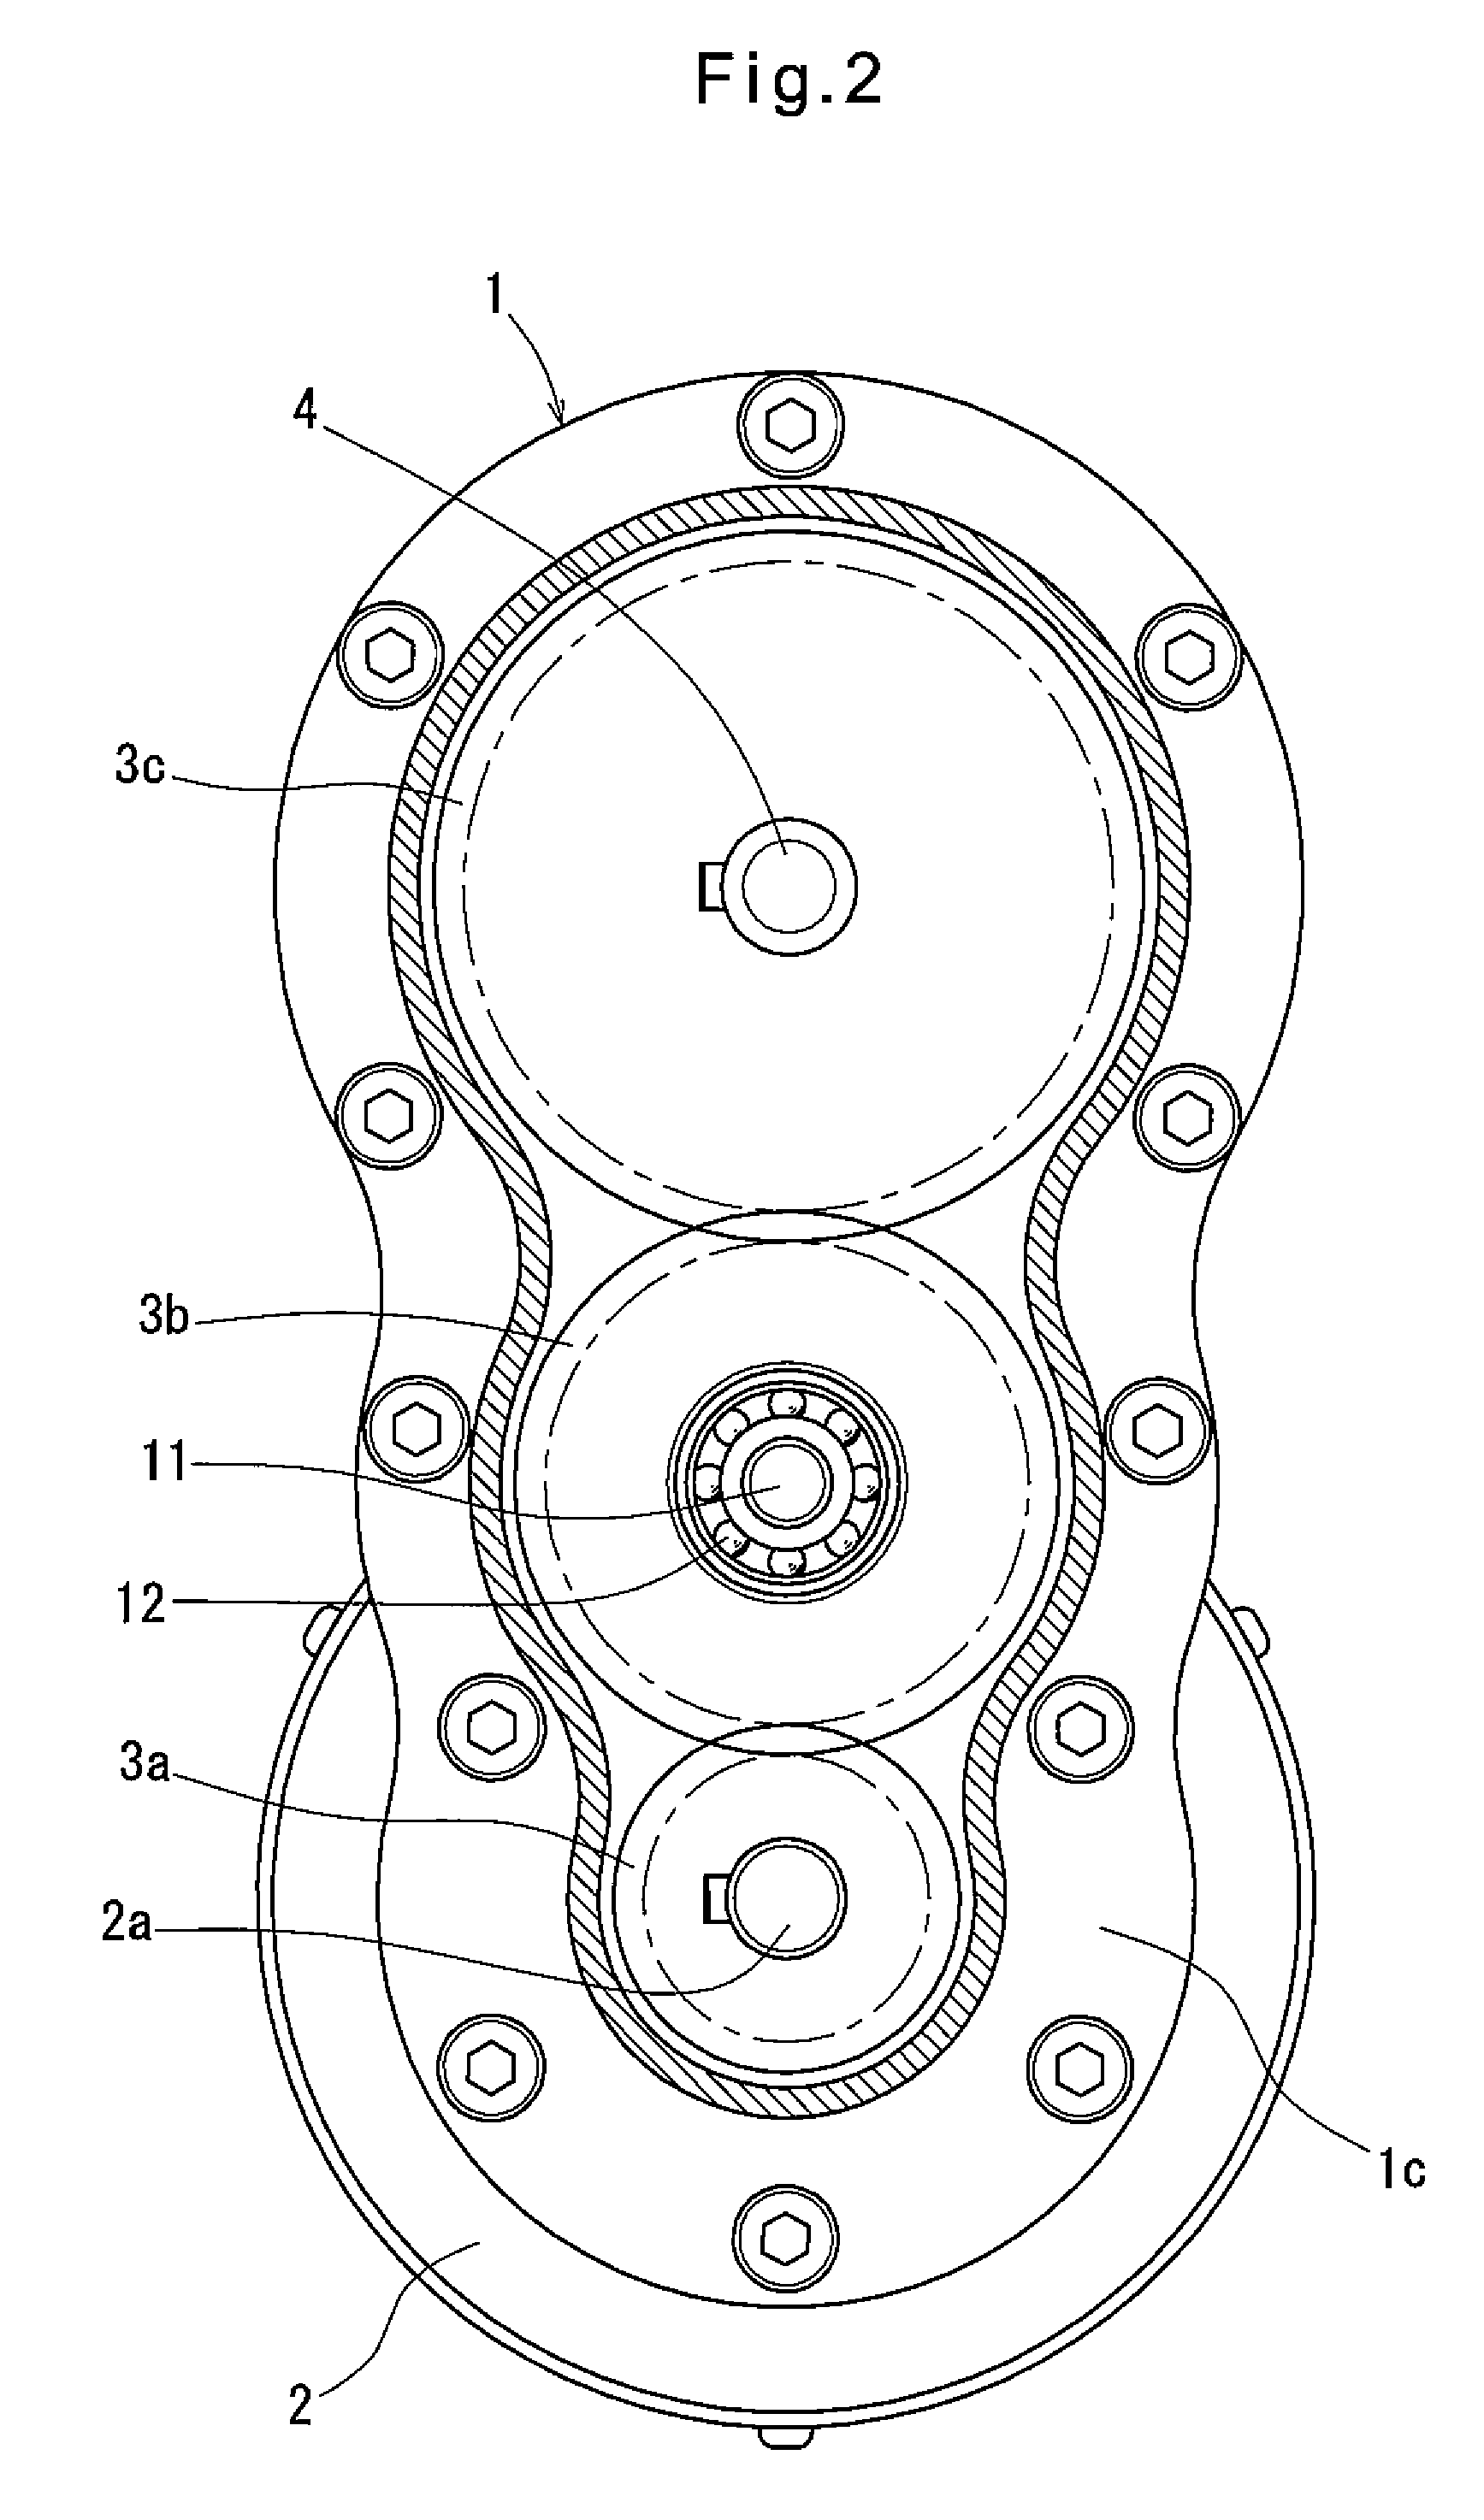 Electric linear motion actuator and electric disk brake system